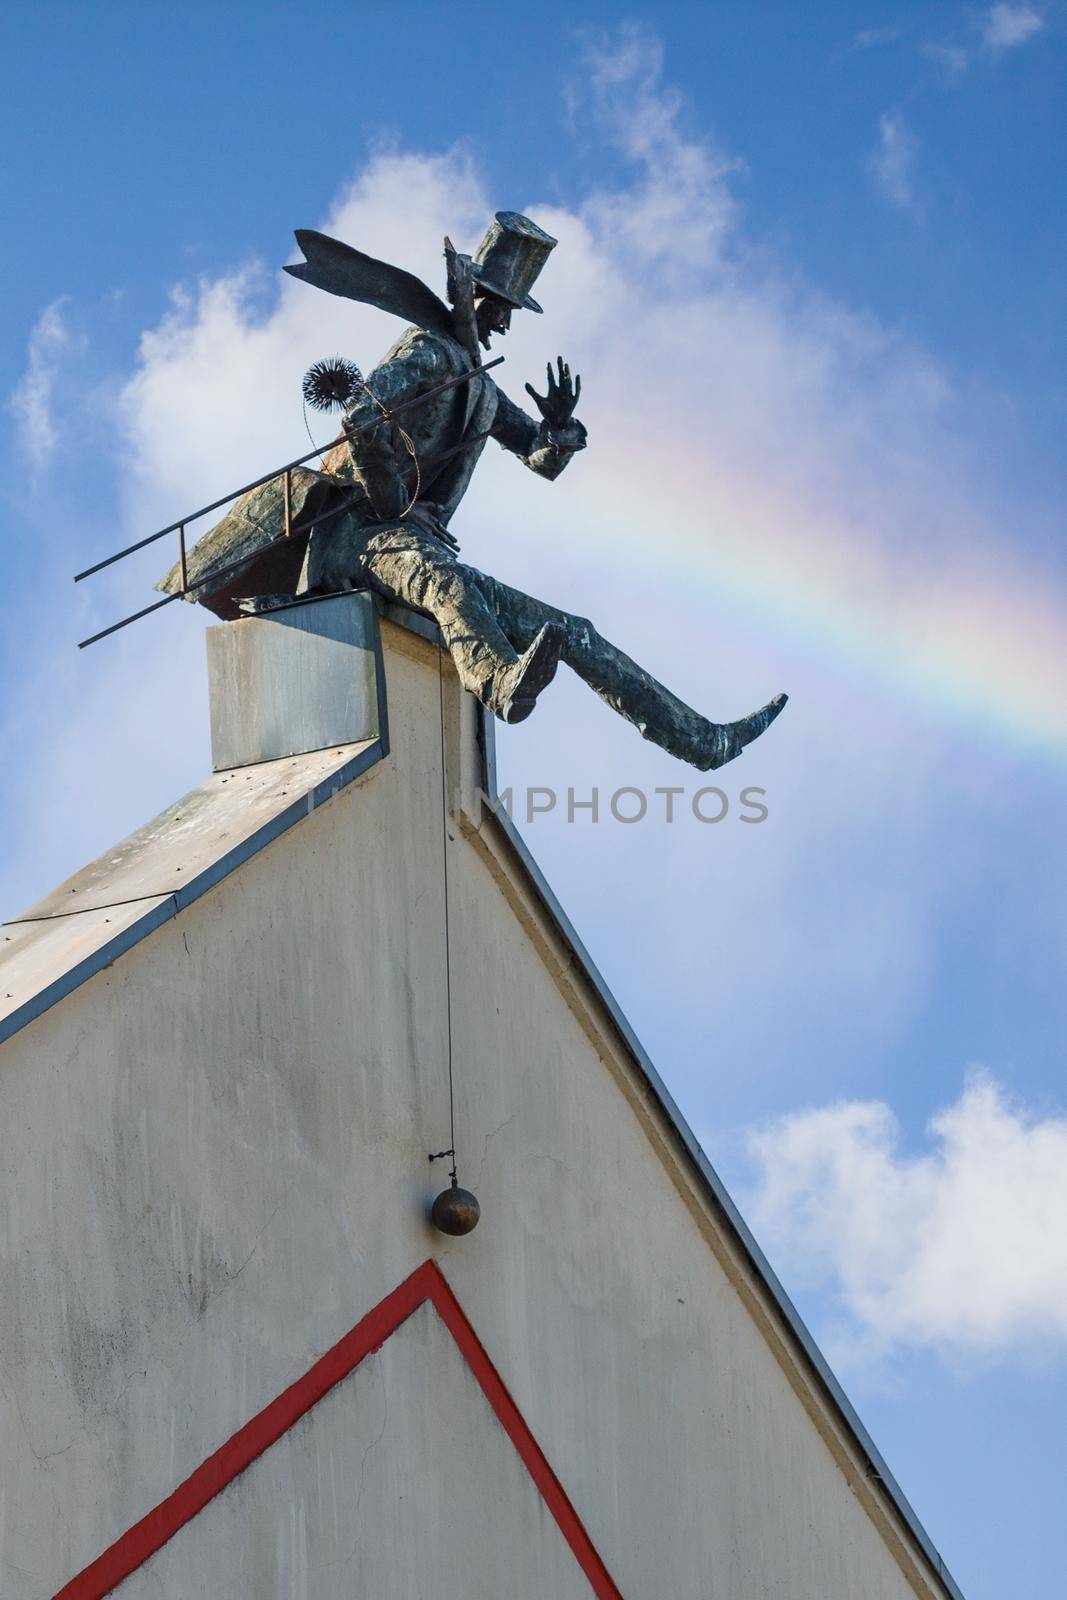 Chimney Sweeper Sculpture on roof in old town of Klaipeda, Lithuania. House wall in Klaipeda Old Town. Blue sky with white clouds and rainbow. by Lincikas